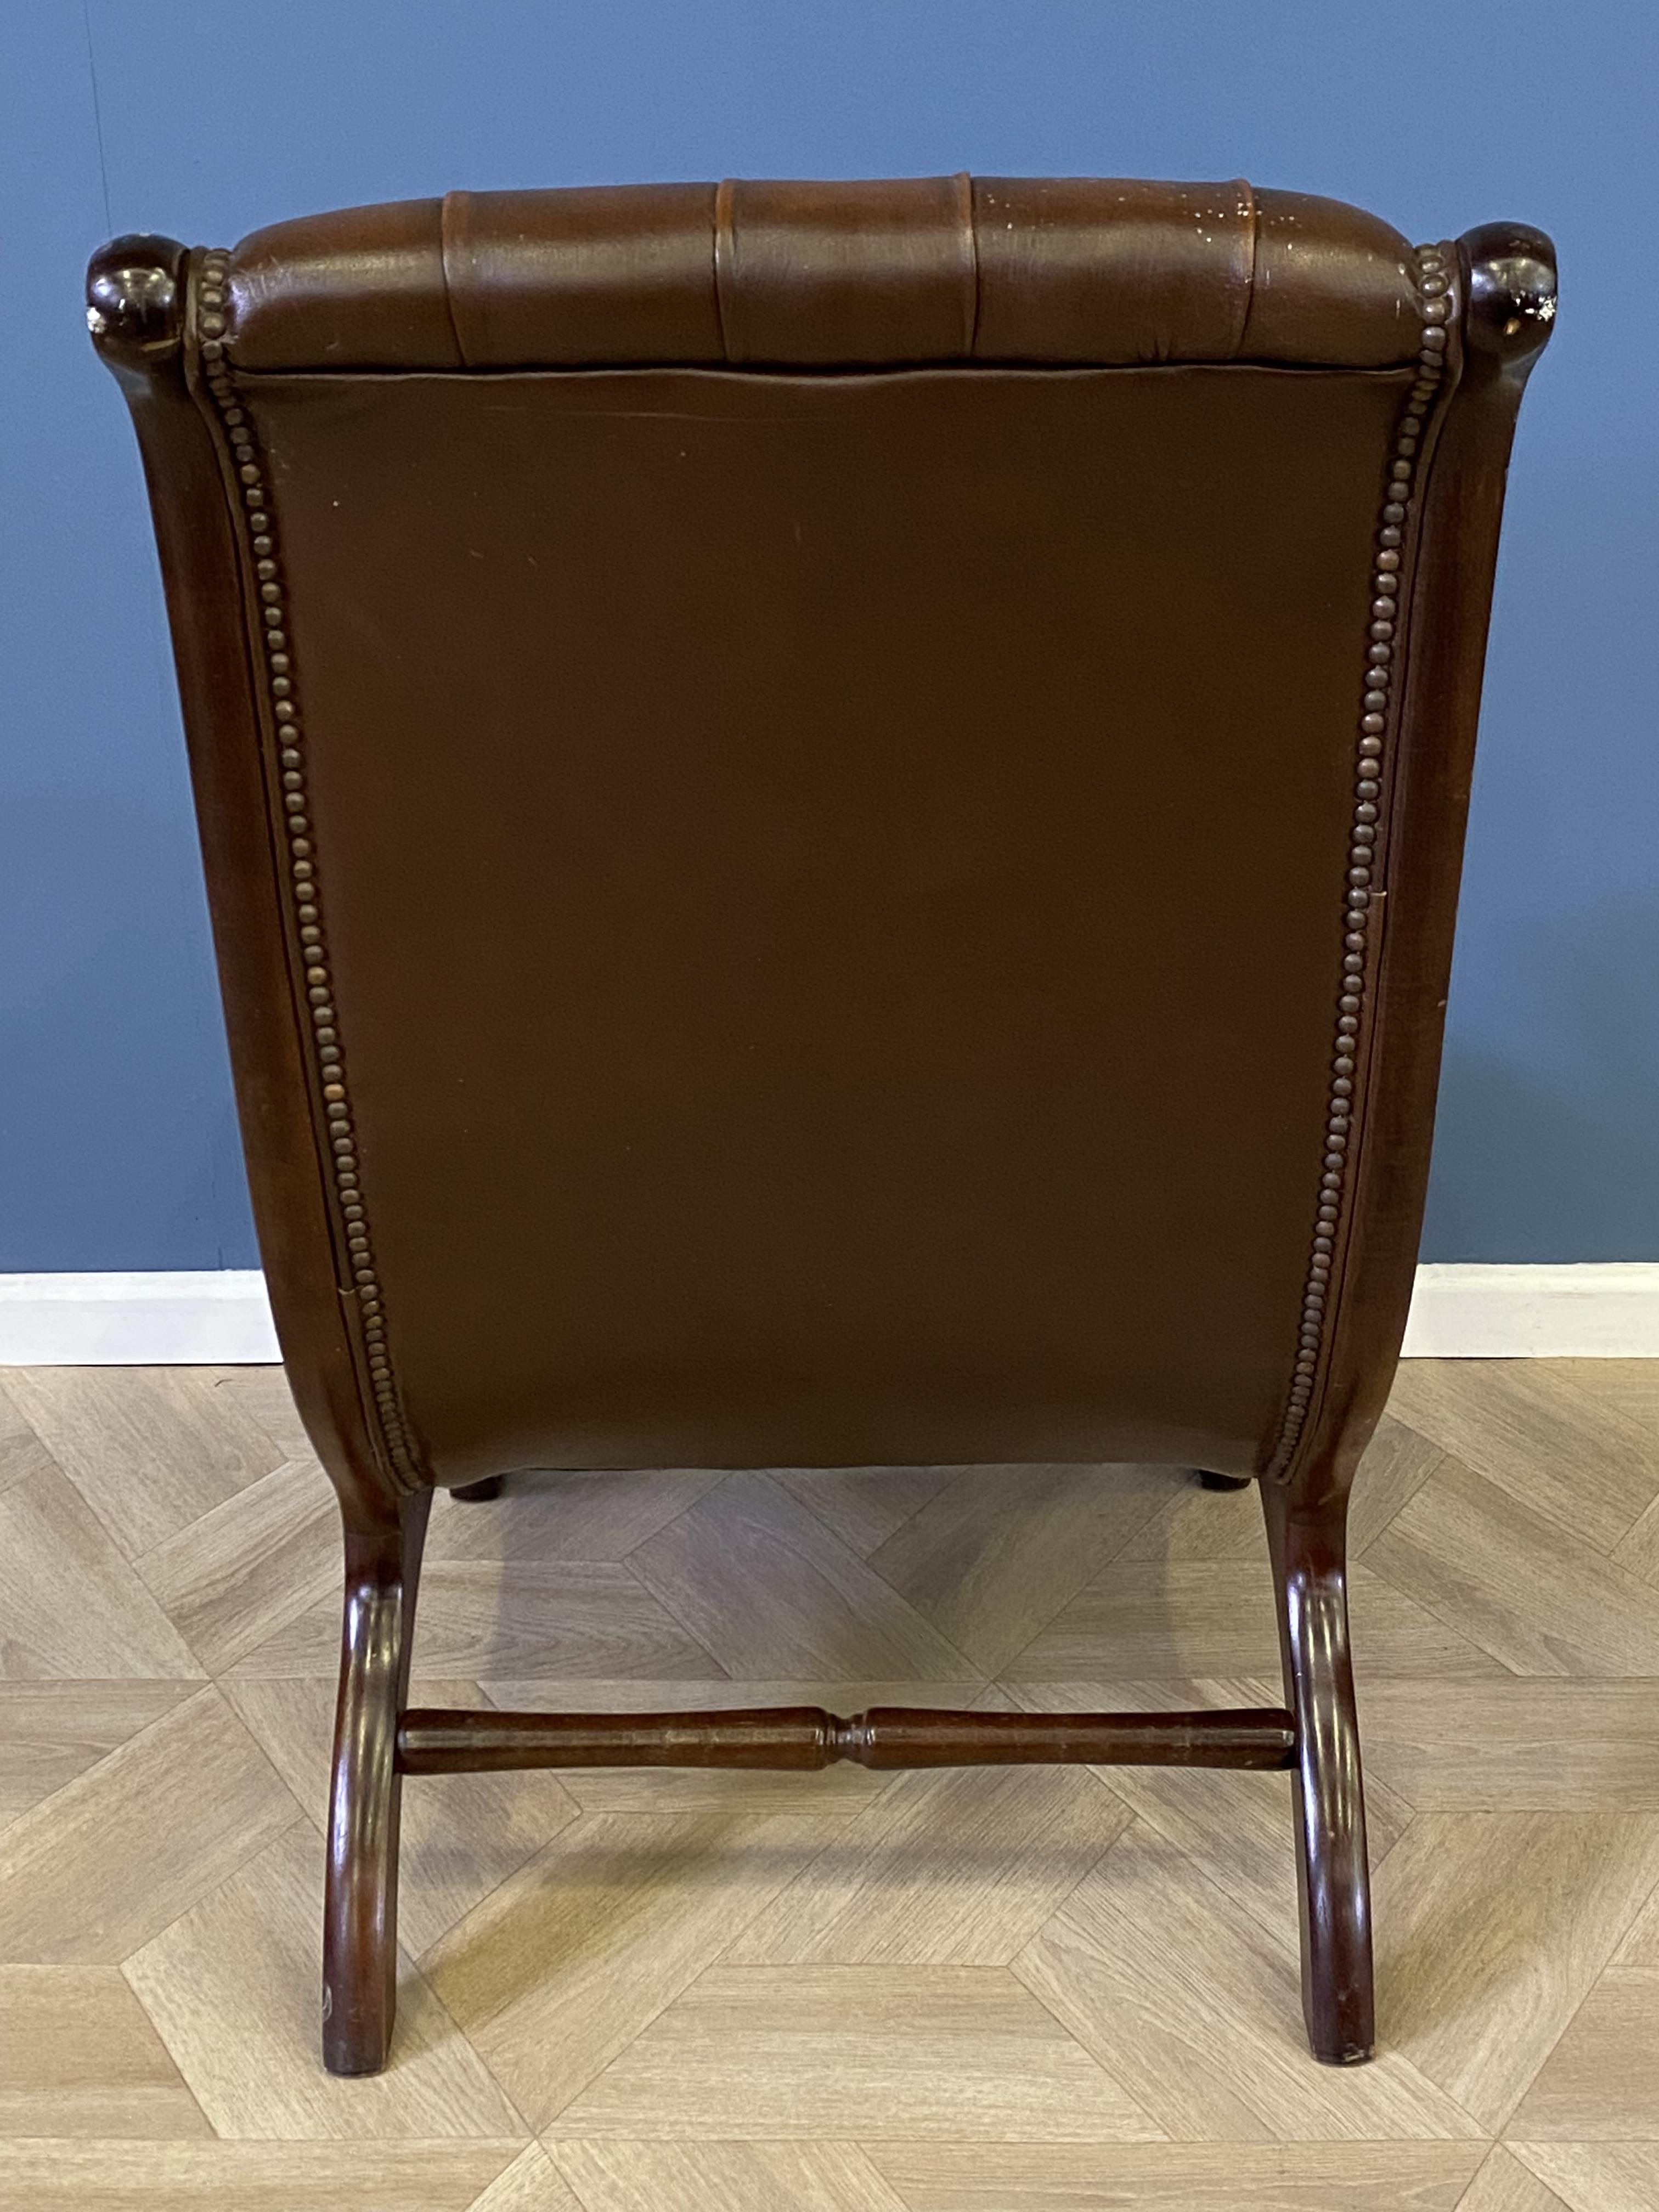 Mahogany framed leather button back armchair - Image 8 of 8